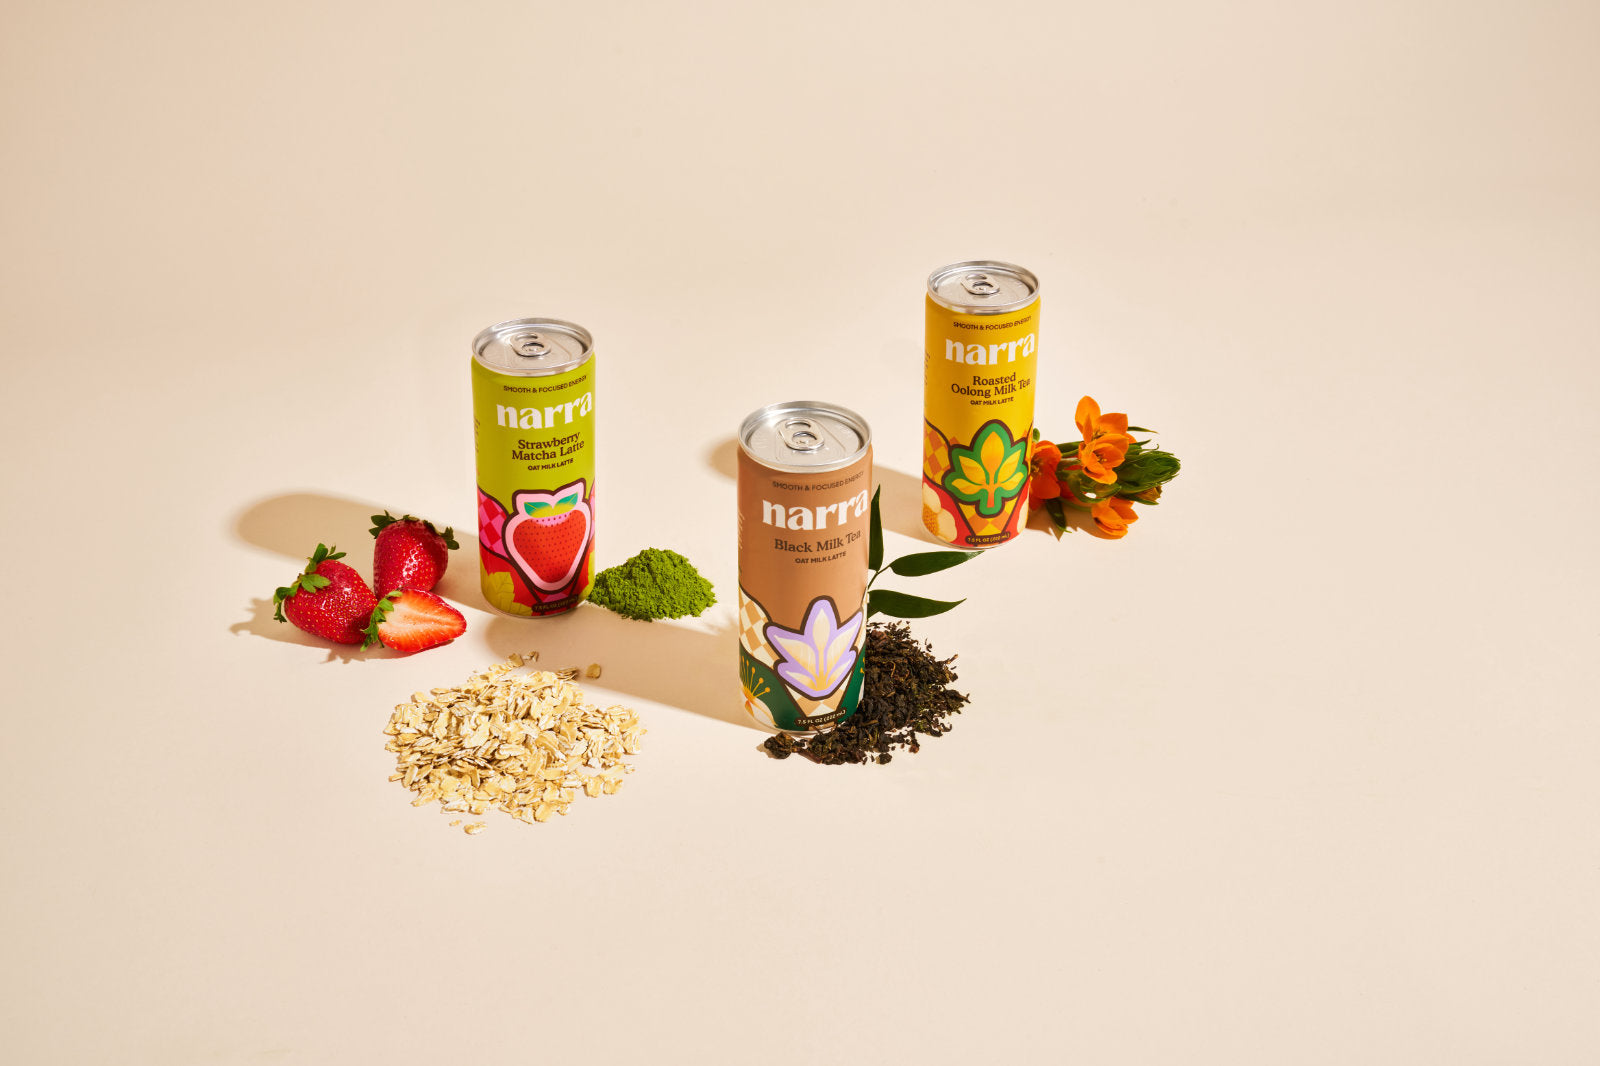 Narra's oat milk lattes on a beige background with ingredients sprinkled around the cans: matcha, loose tea, oats, strawberries, and flowers.